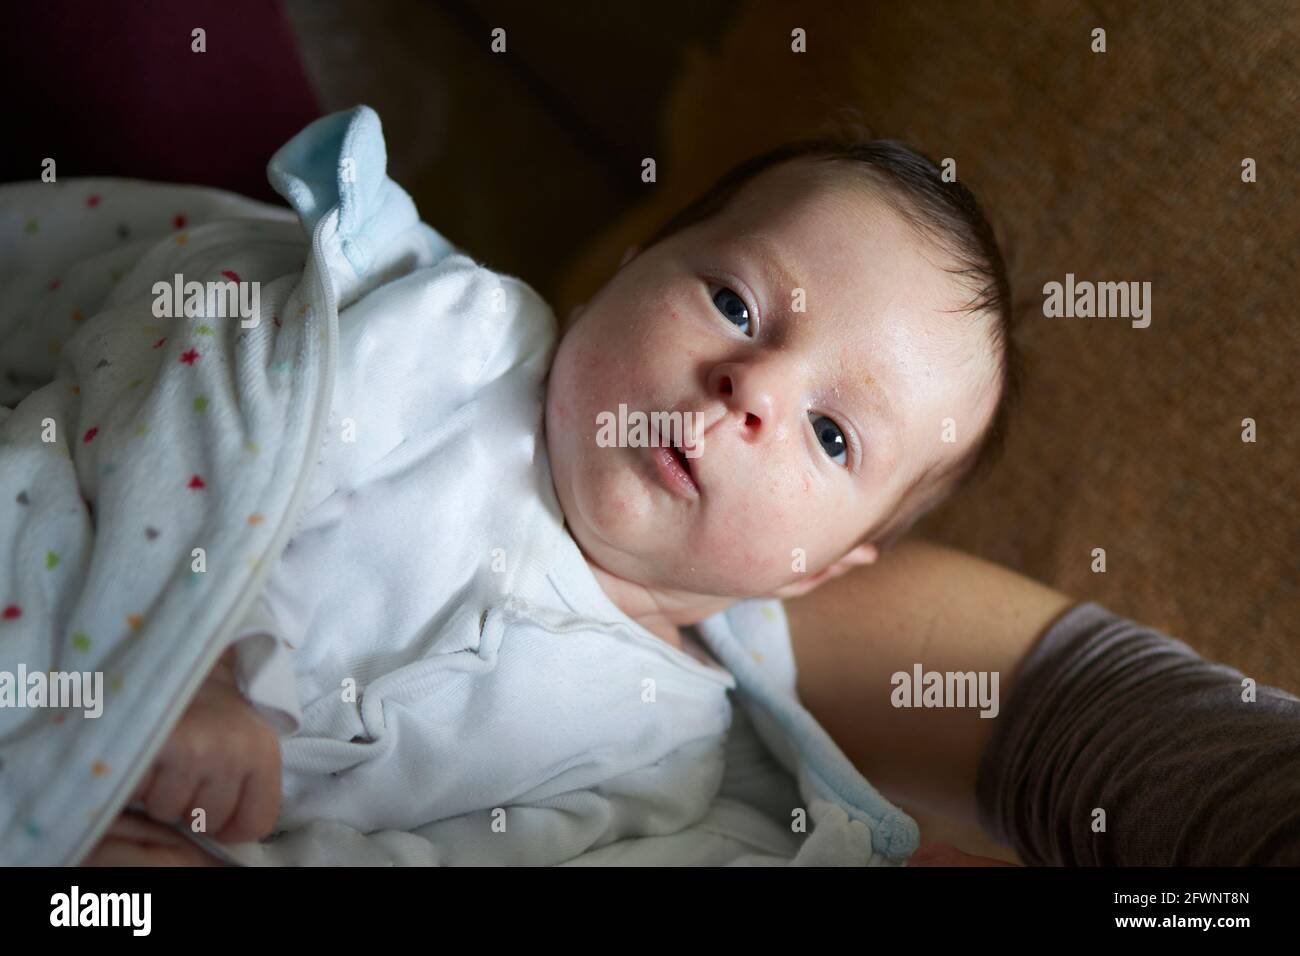 Newborn baby with a funny expression Stock Photo